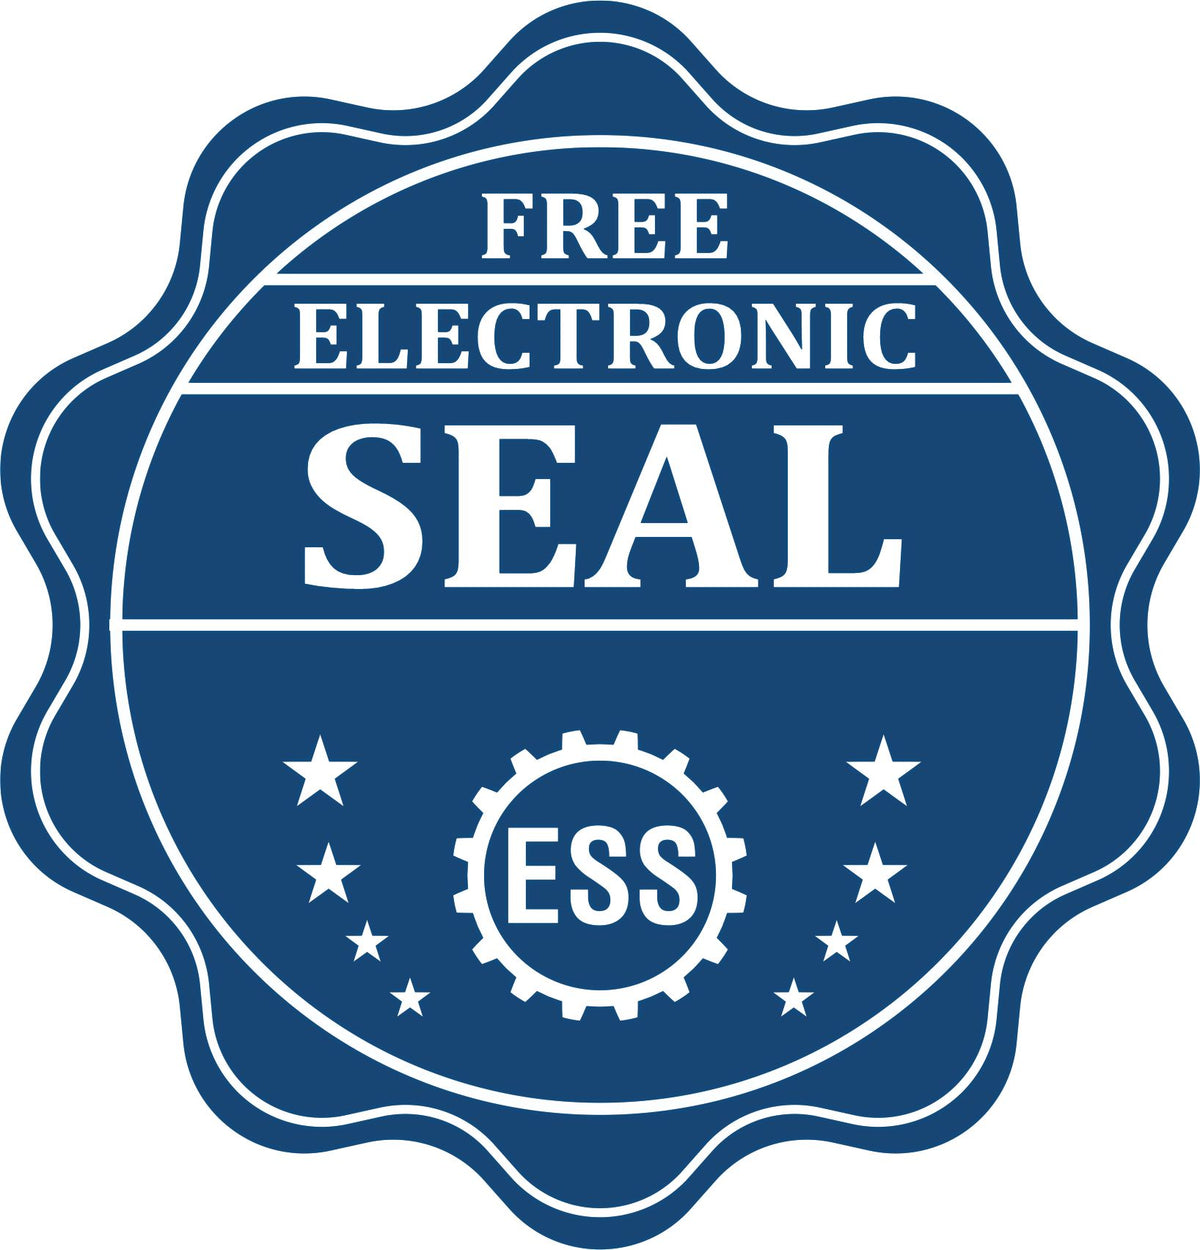 A badge showing a free electronic seal for the Nebraska Engineer Desk Seal with stars and the ESS gear on the emblem.